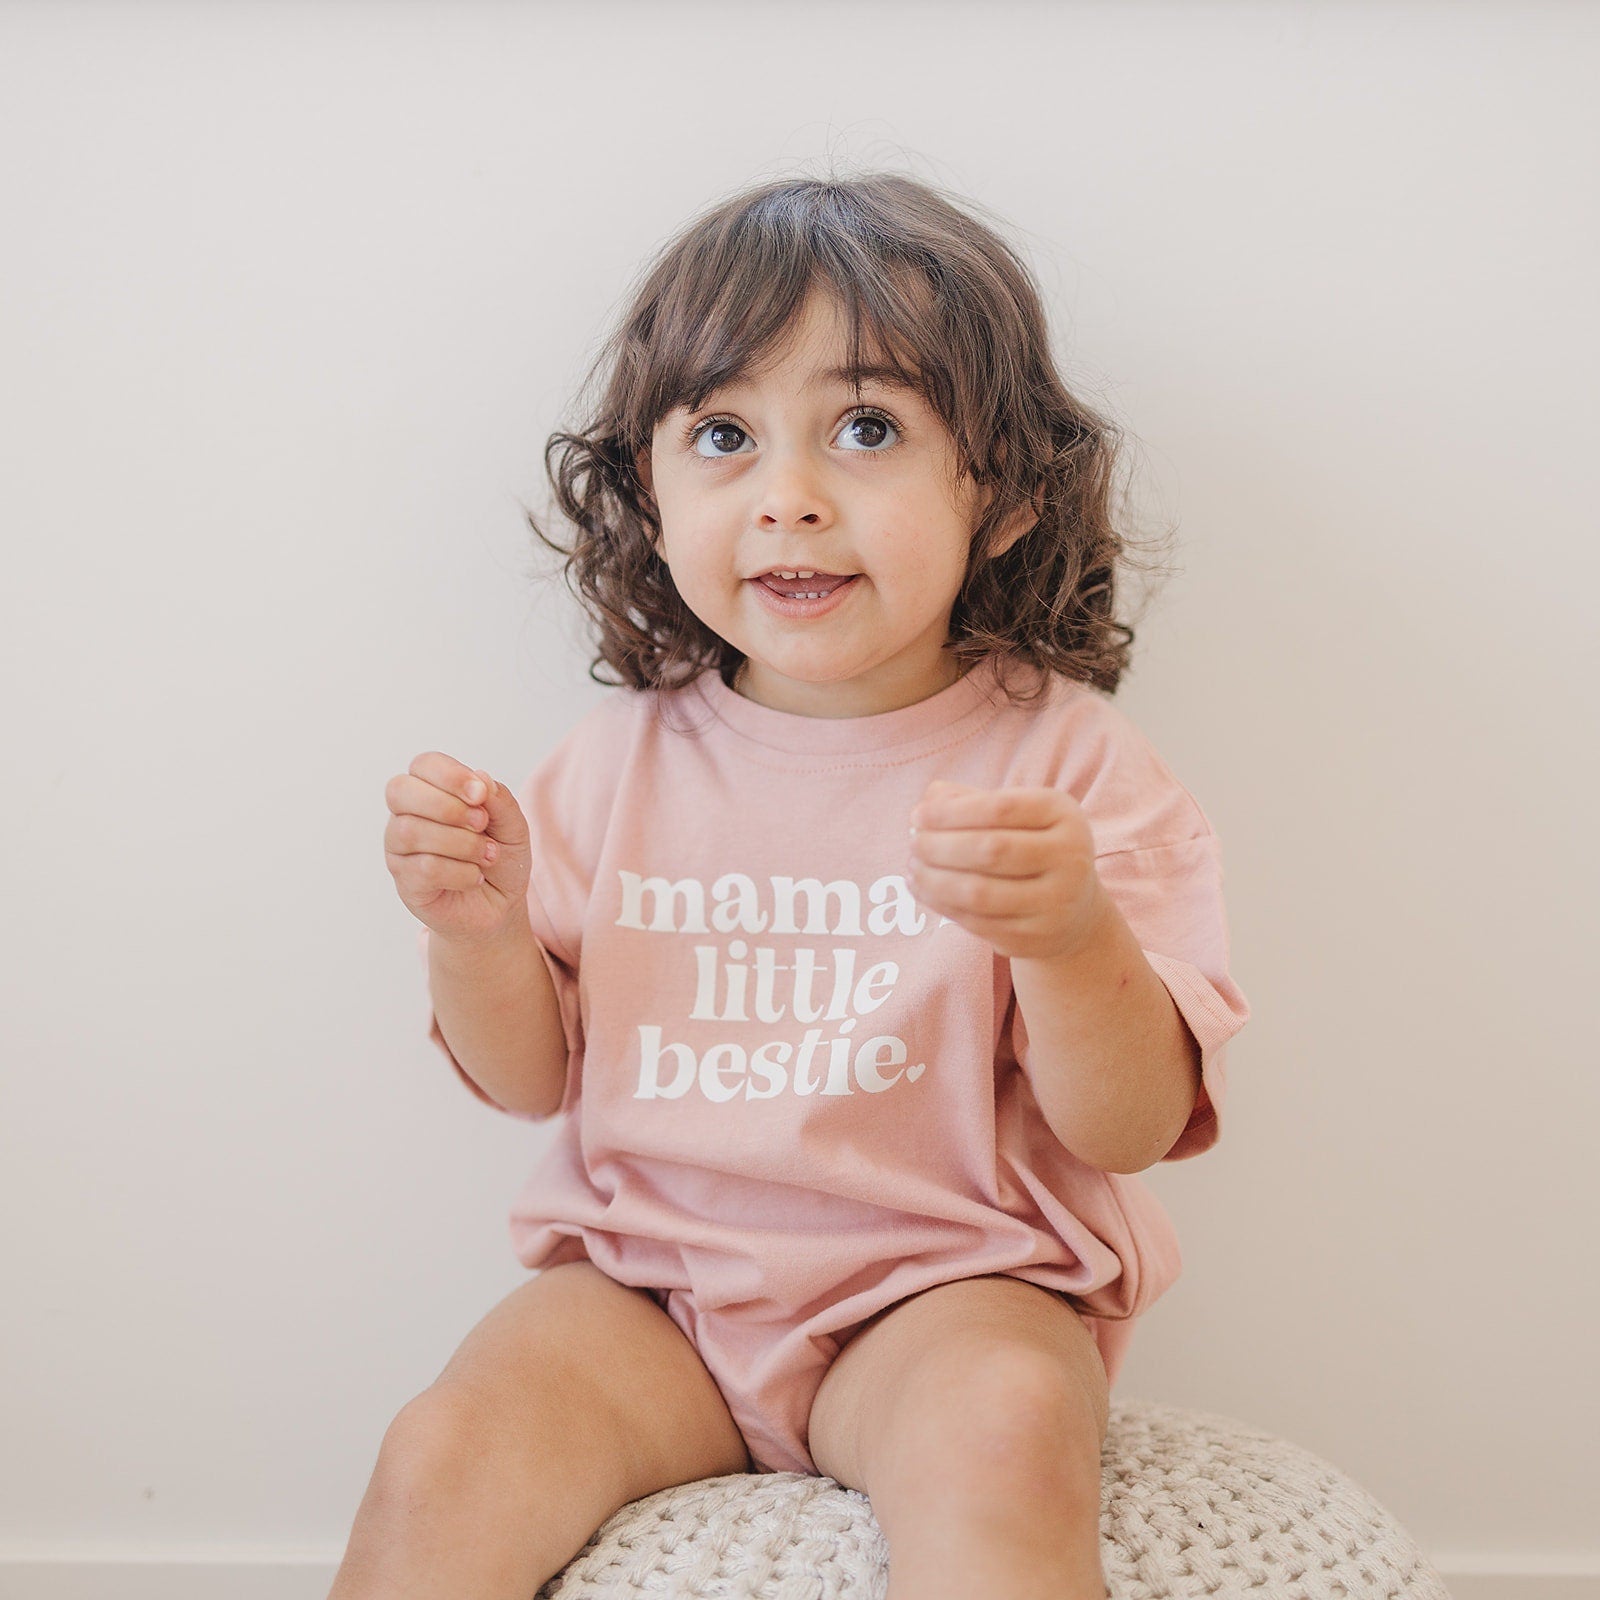 Mama's Little Bestie Oversized T-Shirt Romper - Baby Girl Bubble Romper - Baby Girl Outfit - Baby Girl Outfit Shirt - Mom Daughter